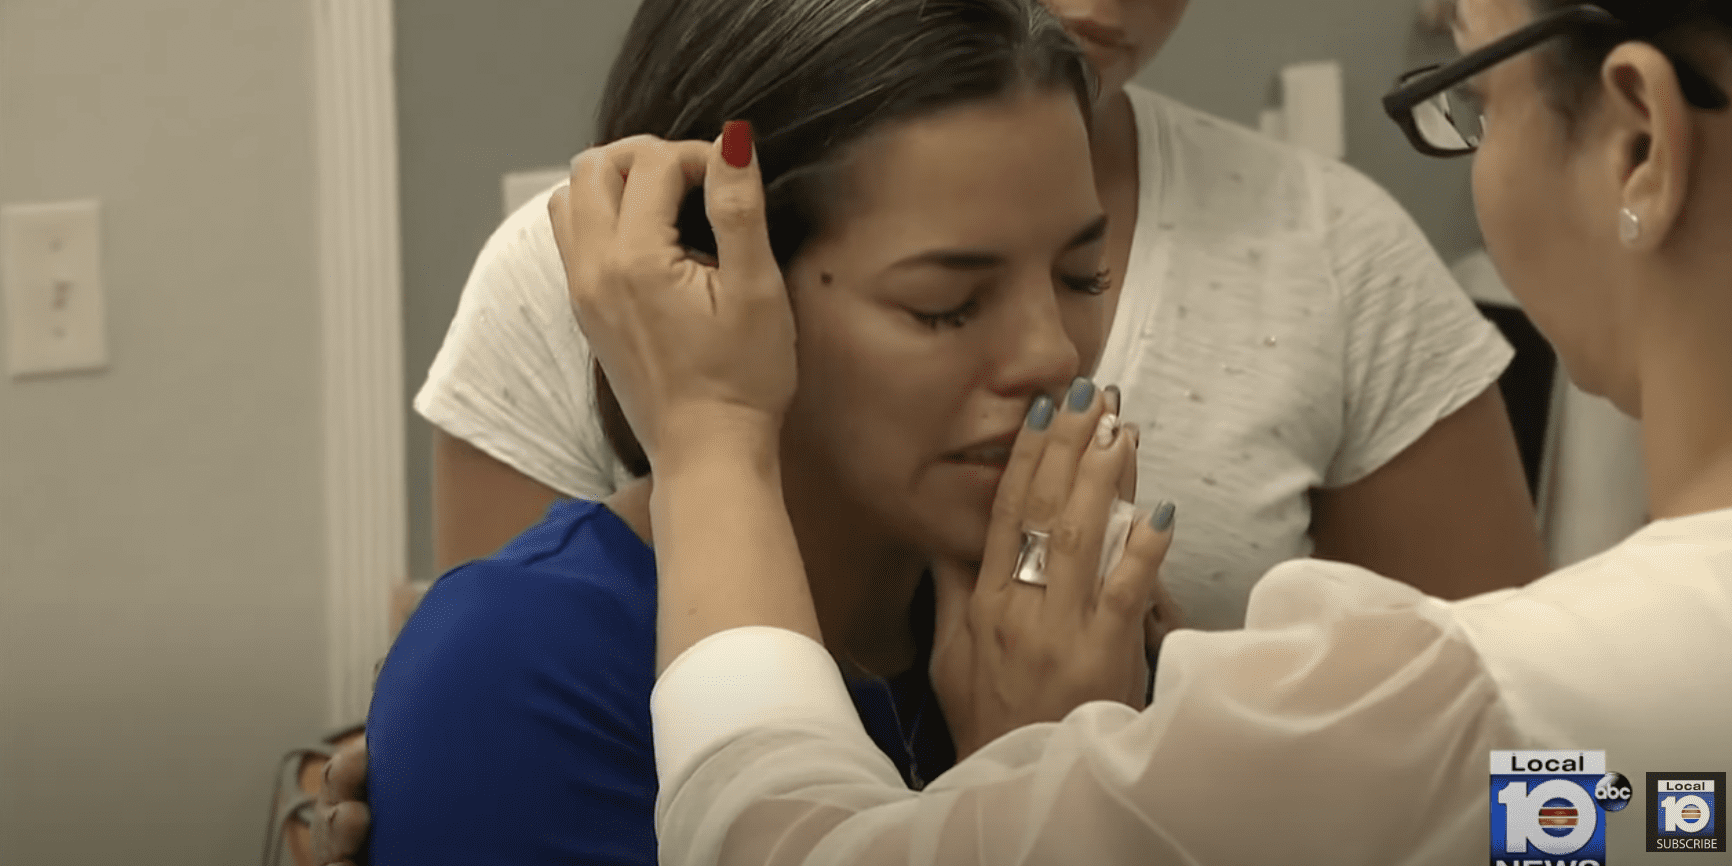 A teary-eyed Yanet Leal Concepcion is comforted by her loved ones. | Source: YouTube.com/WPLG Local 10